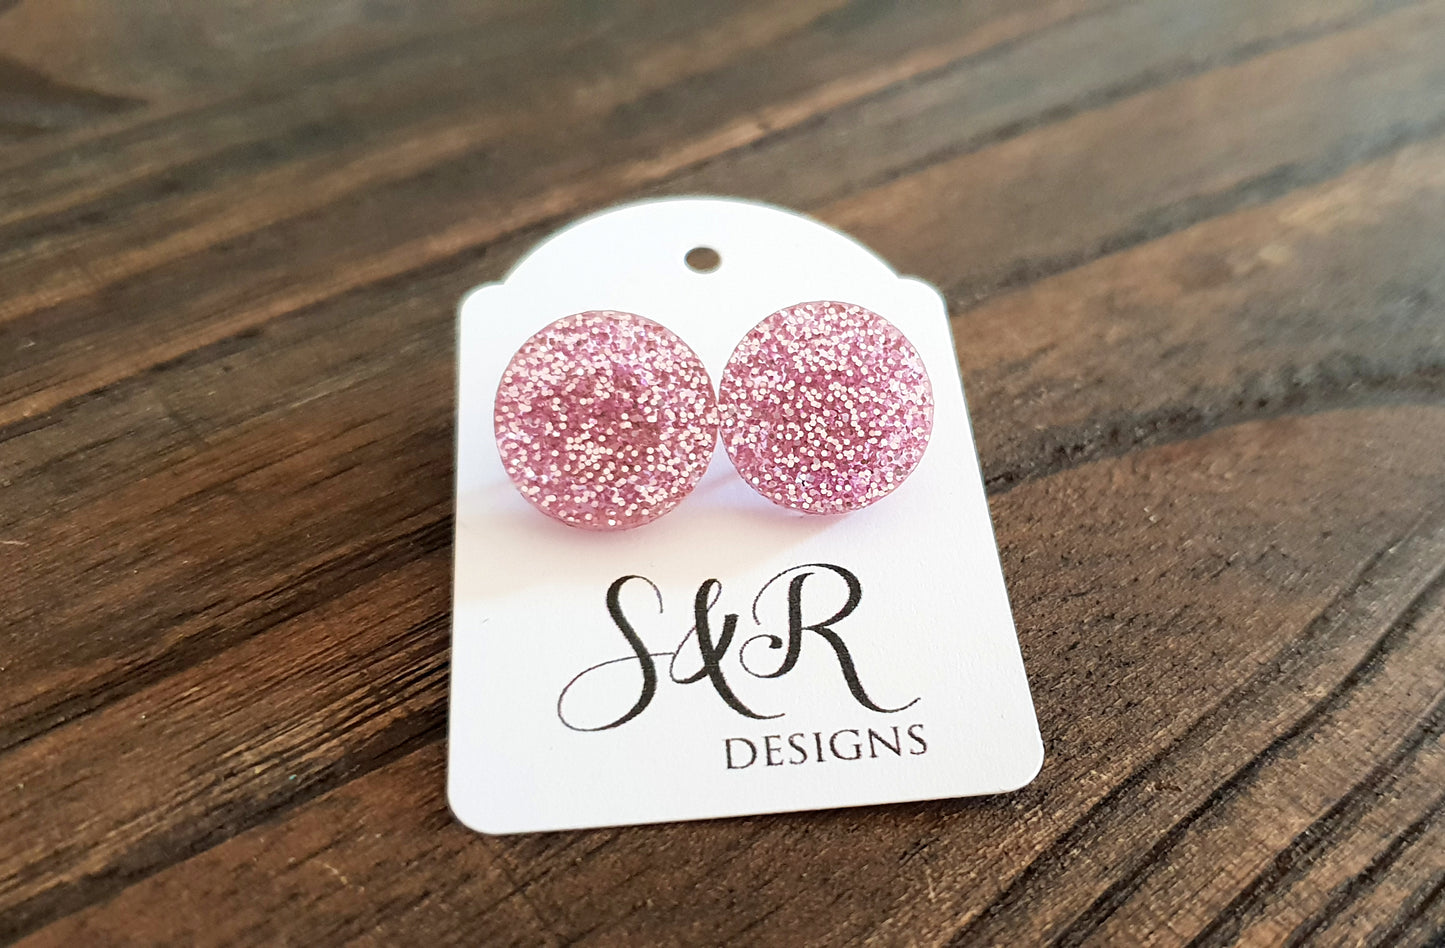 Circle Stud Earrings Light Pink Glitter Acrylic - Silver and Resin Designs